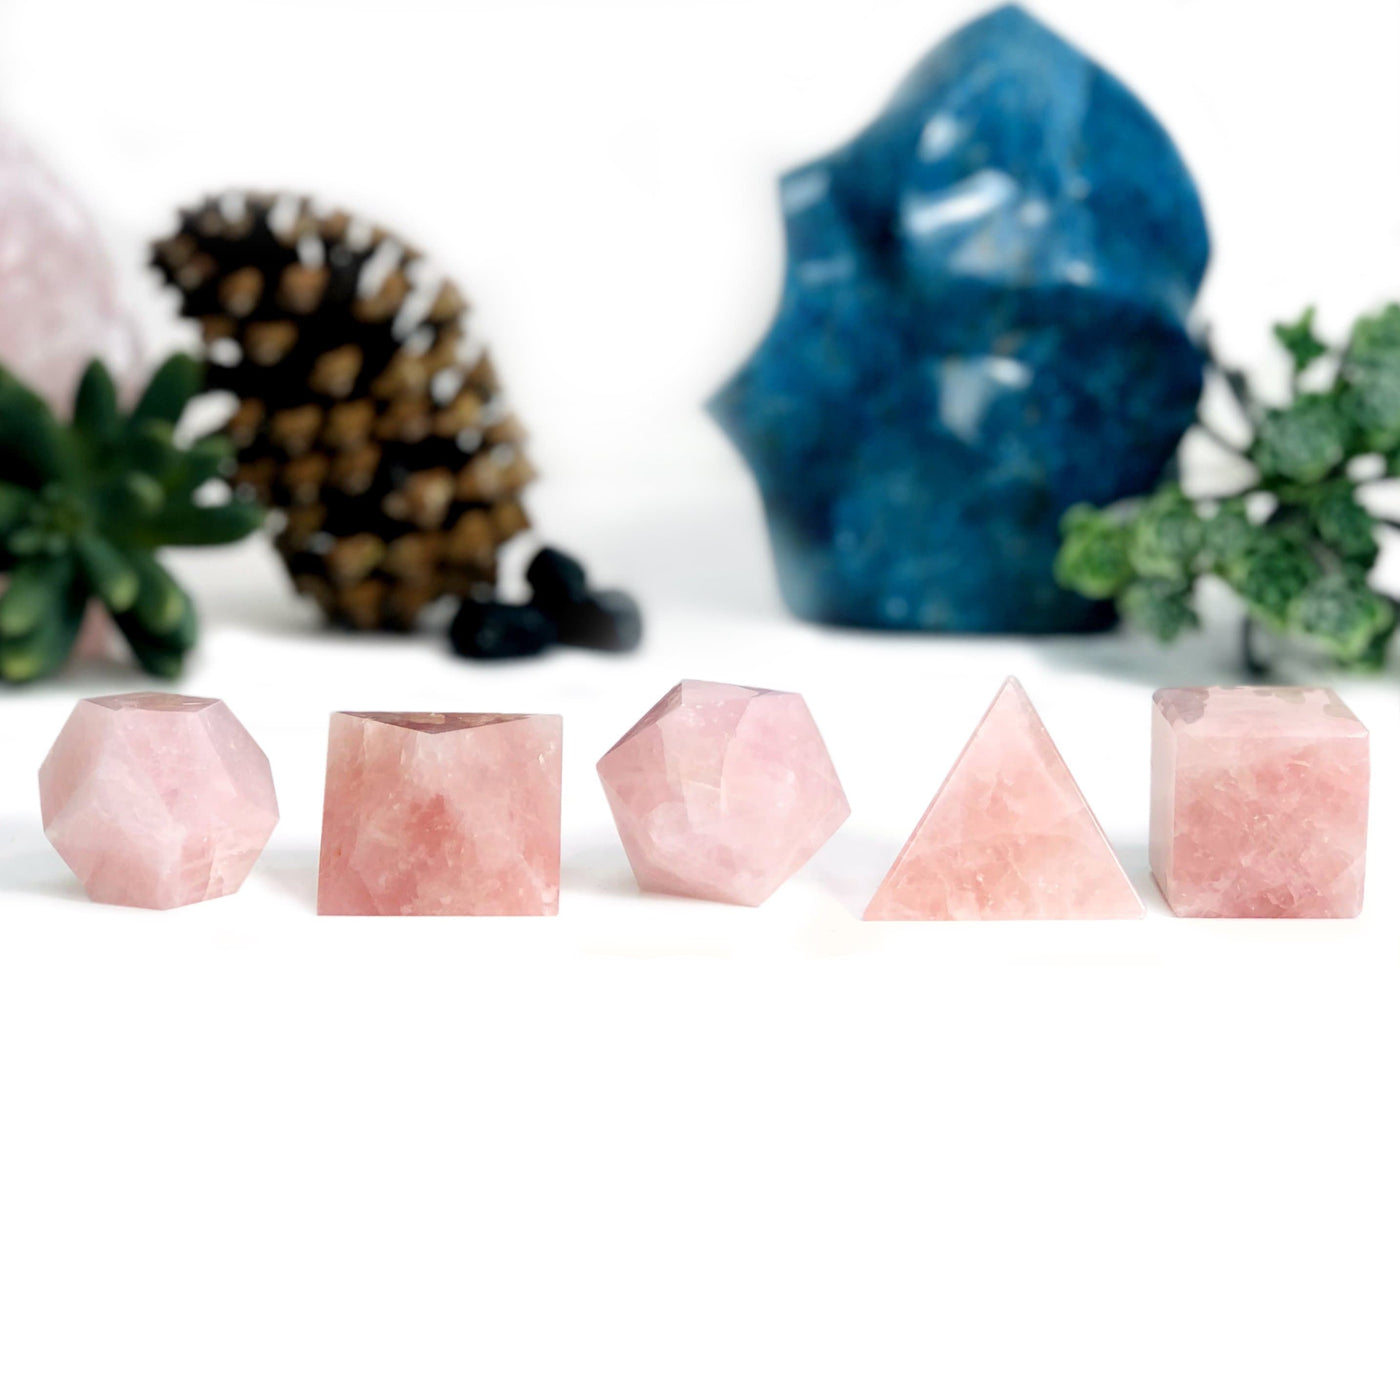 Rose Quartz Sacred Geometry Meditation Set lined up with other decorations burred in the background